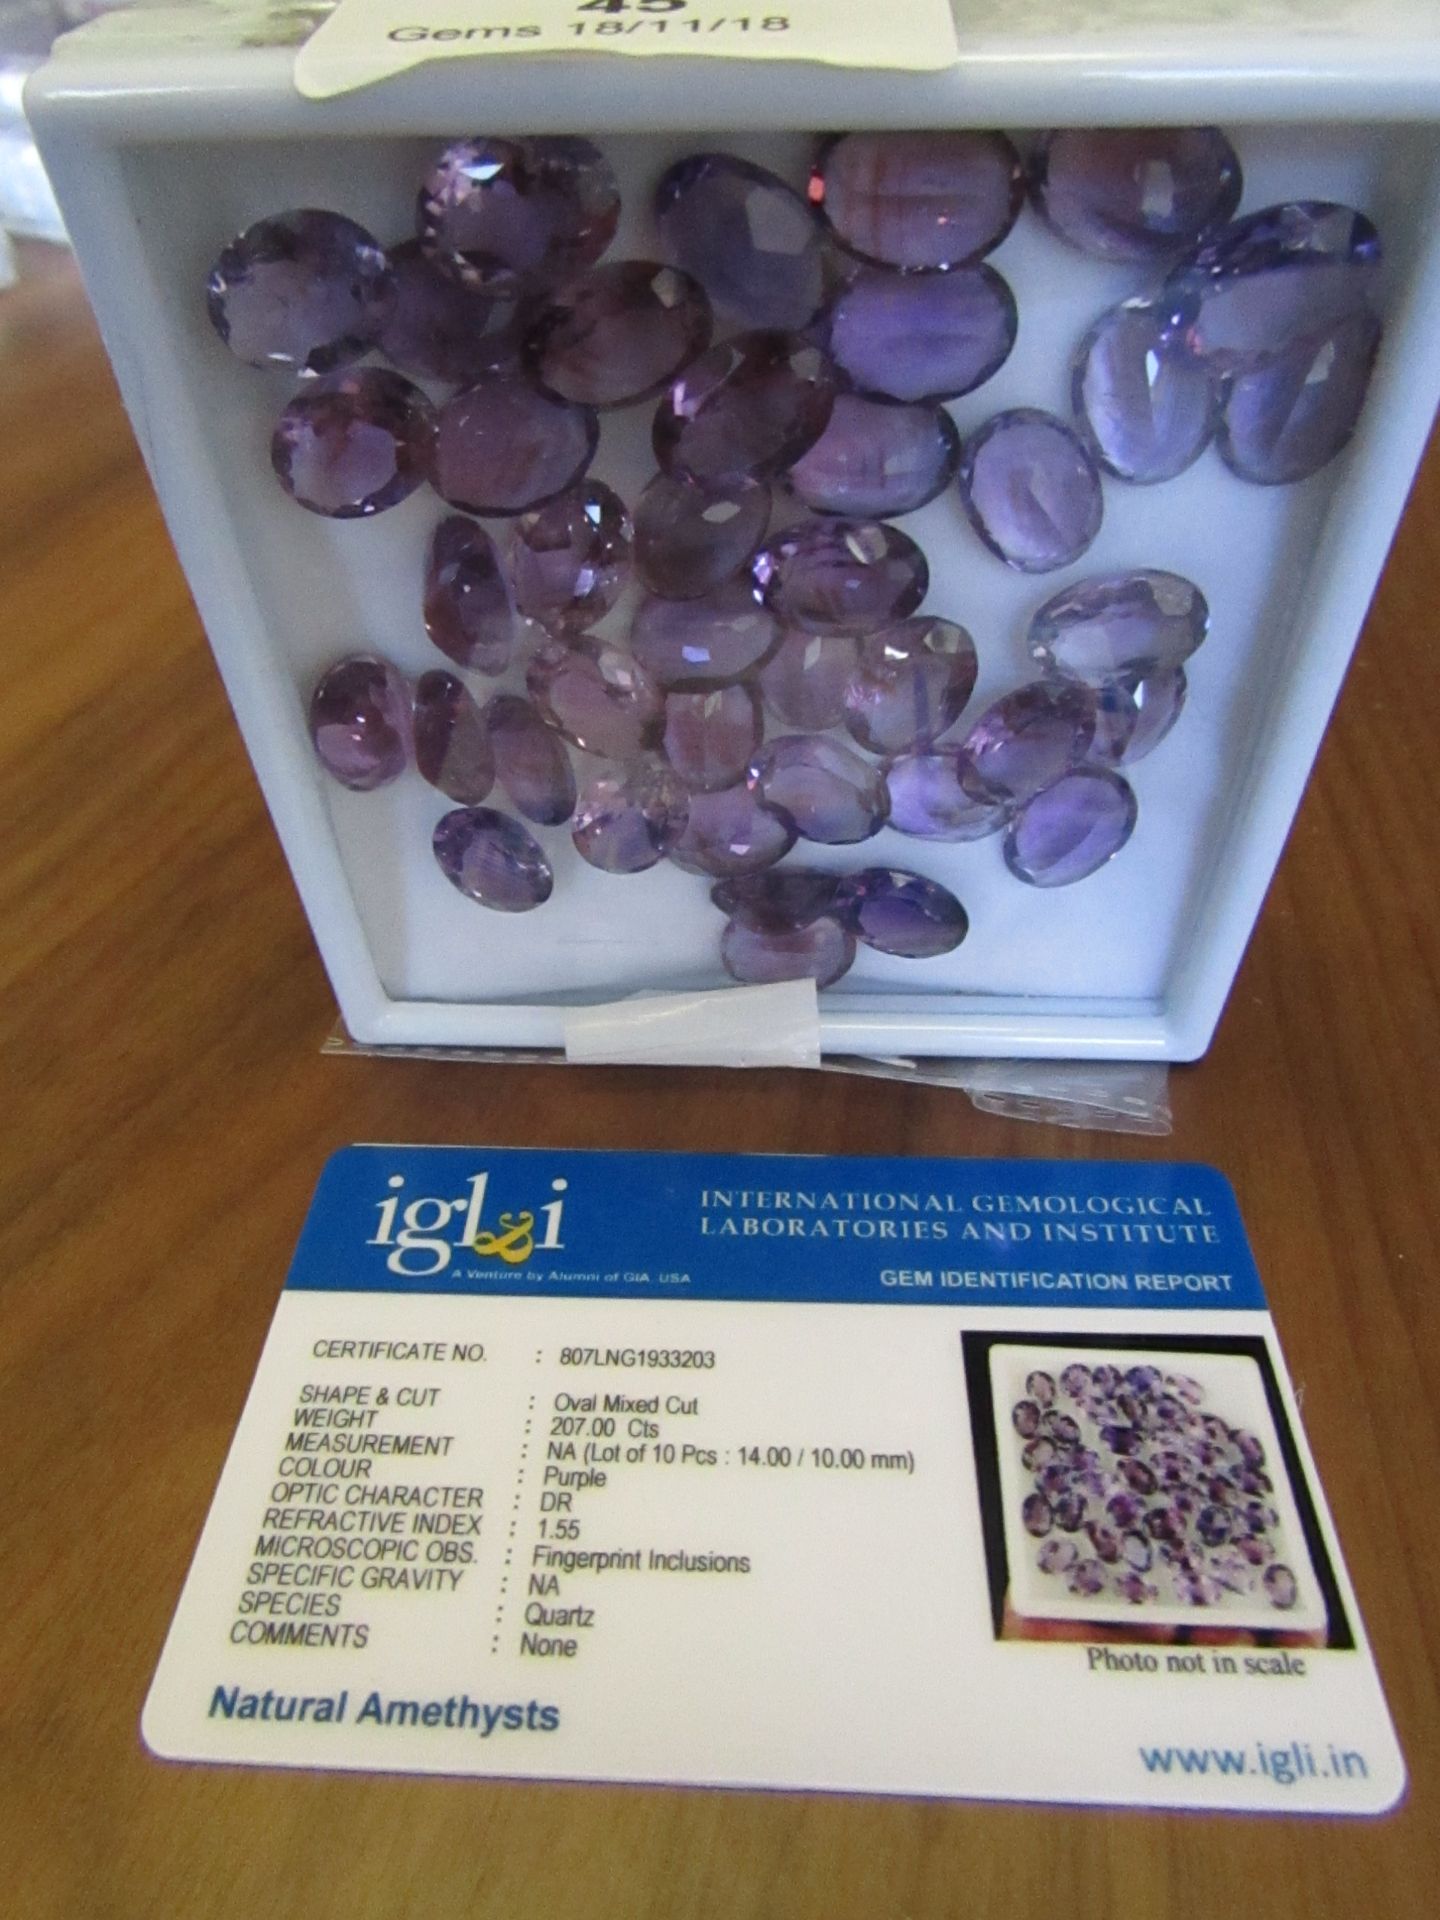 10 pieces Purple Natural Amethysts. Oval Mixed Cut. Total Weight 207 Carats. As per Gem